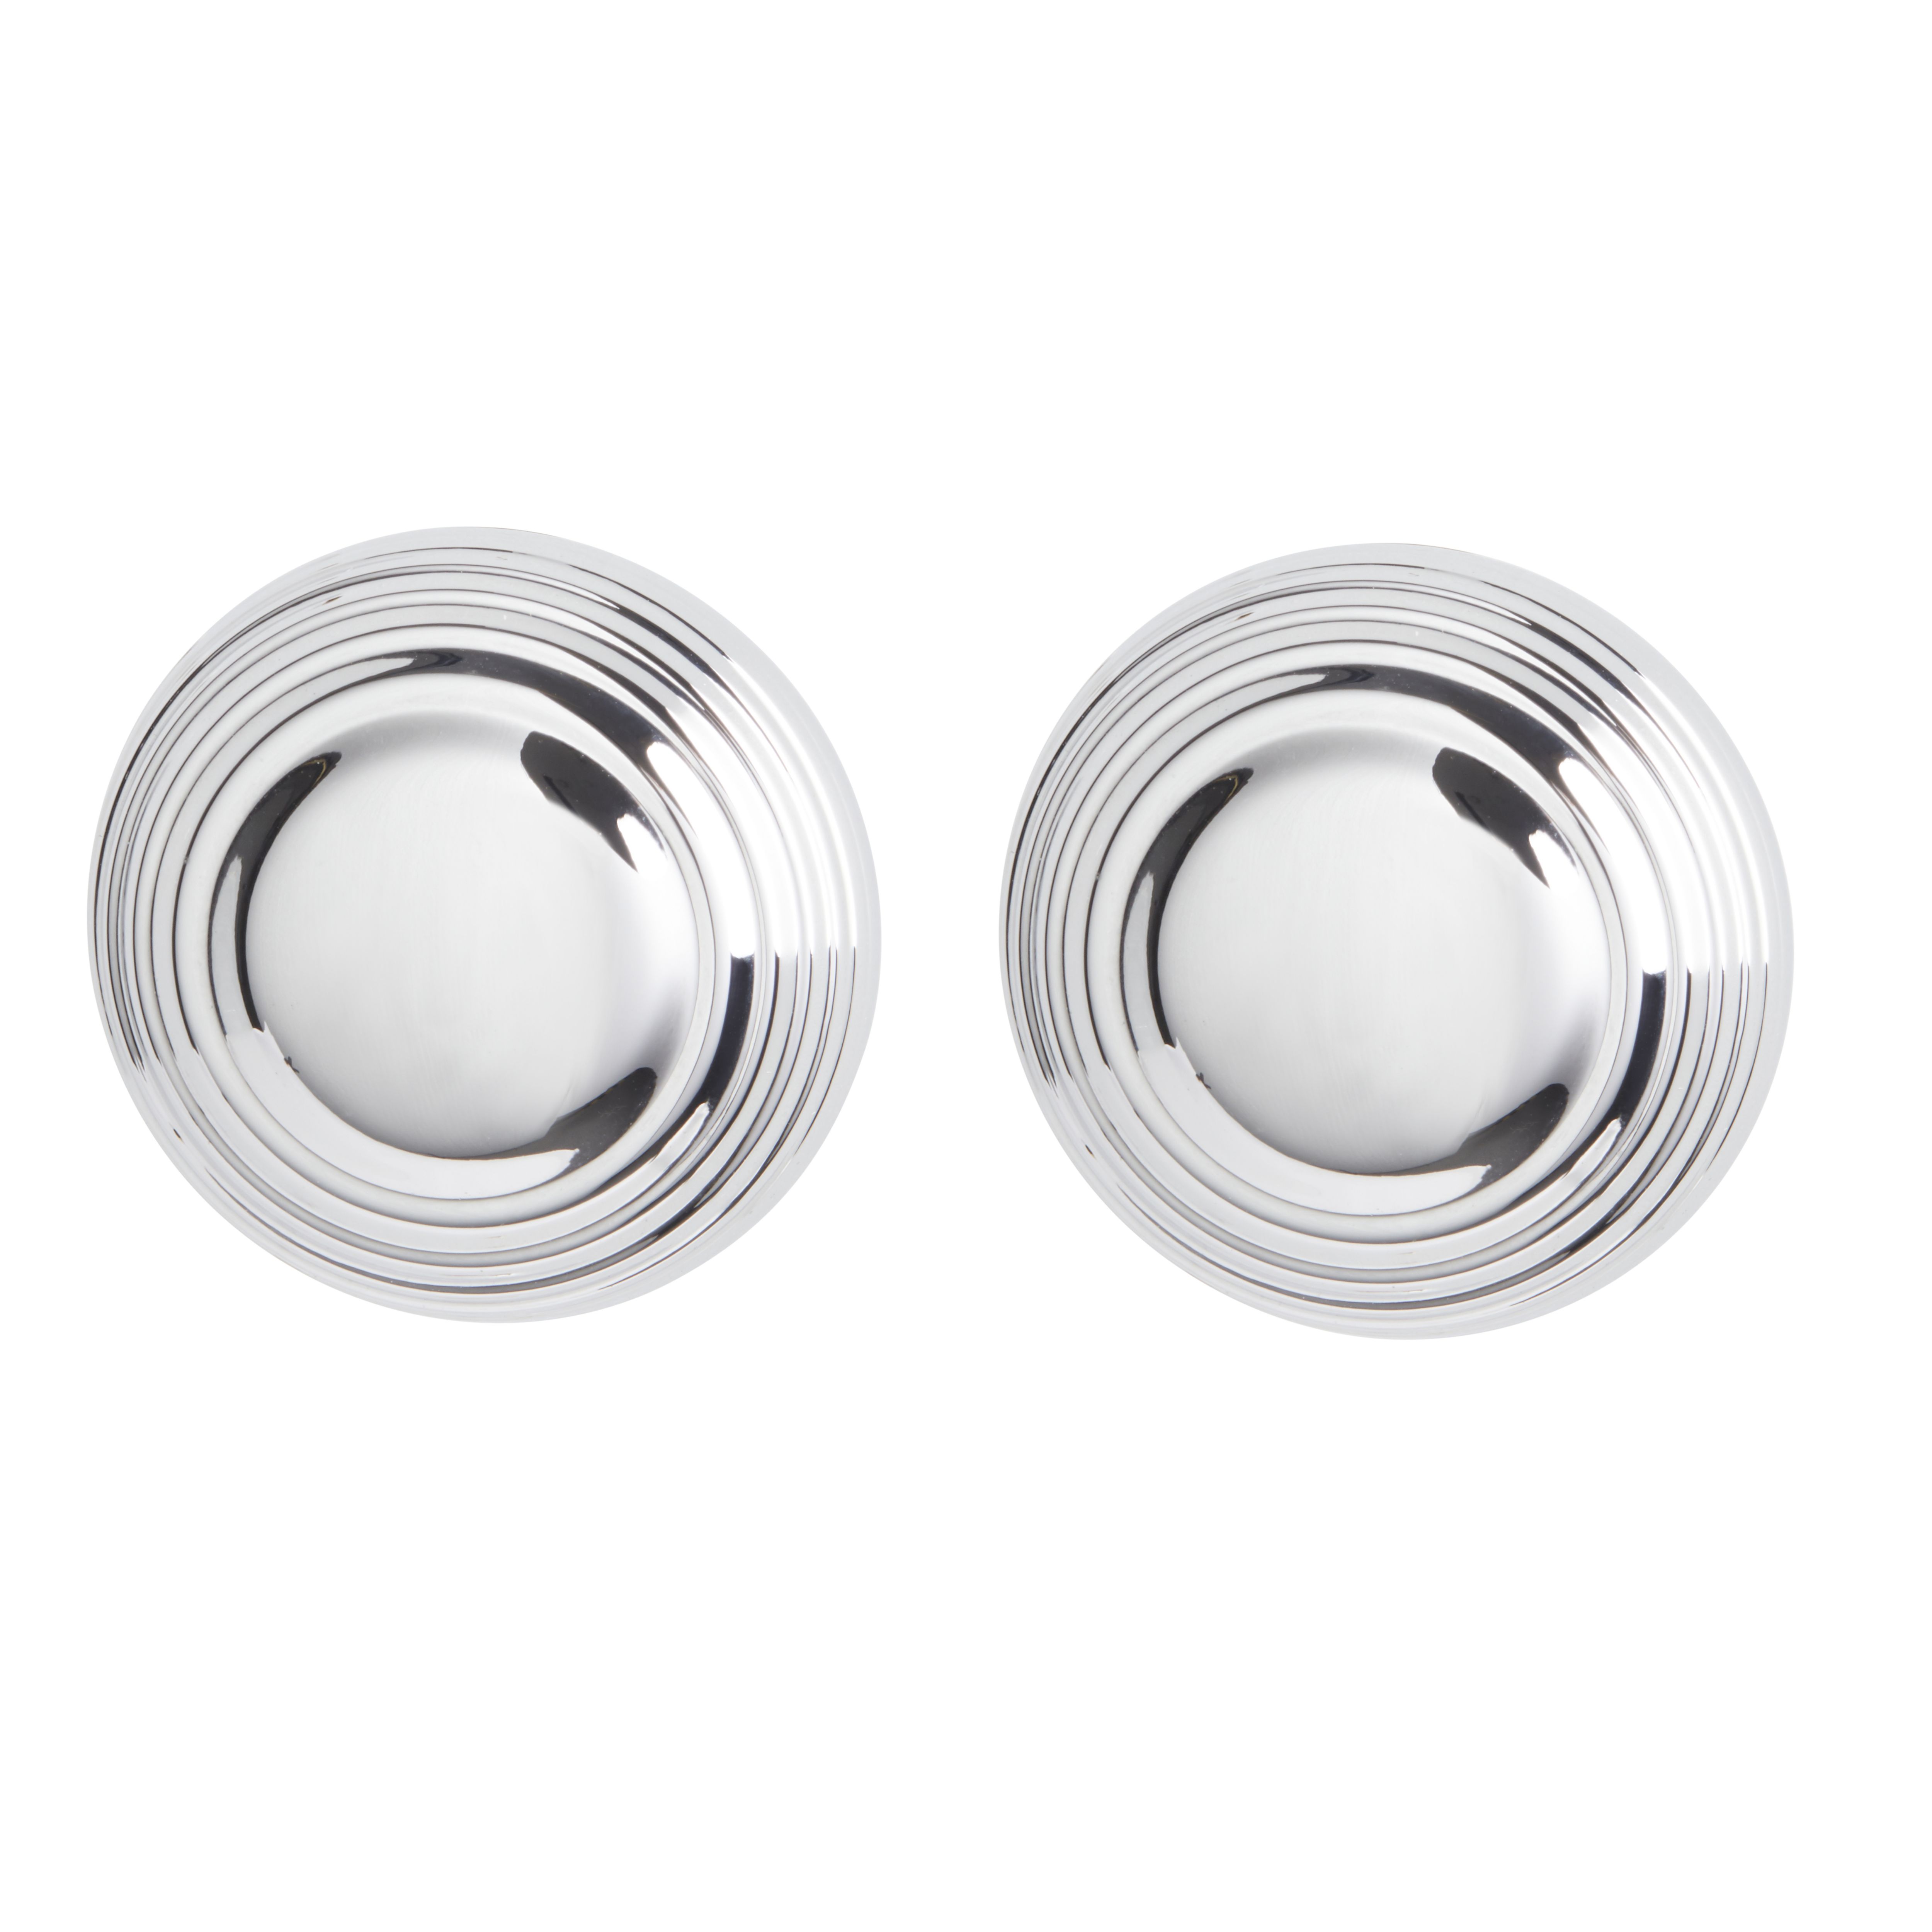 GoodHome Garni Chrome effect Kitchen cabinets Round Handle (L)3.2cm, Pack of 2